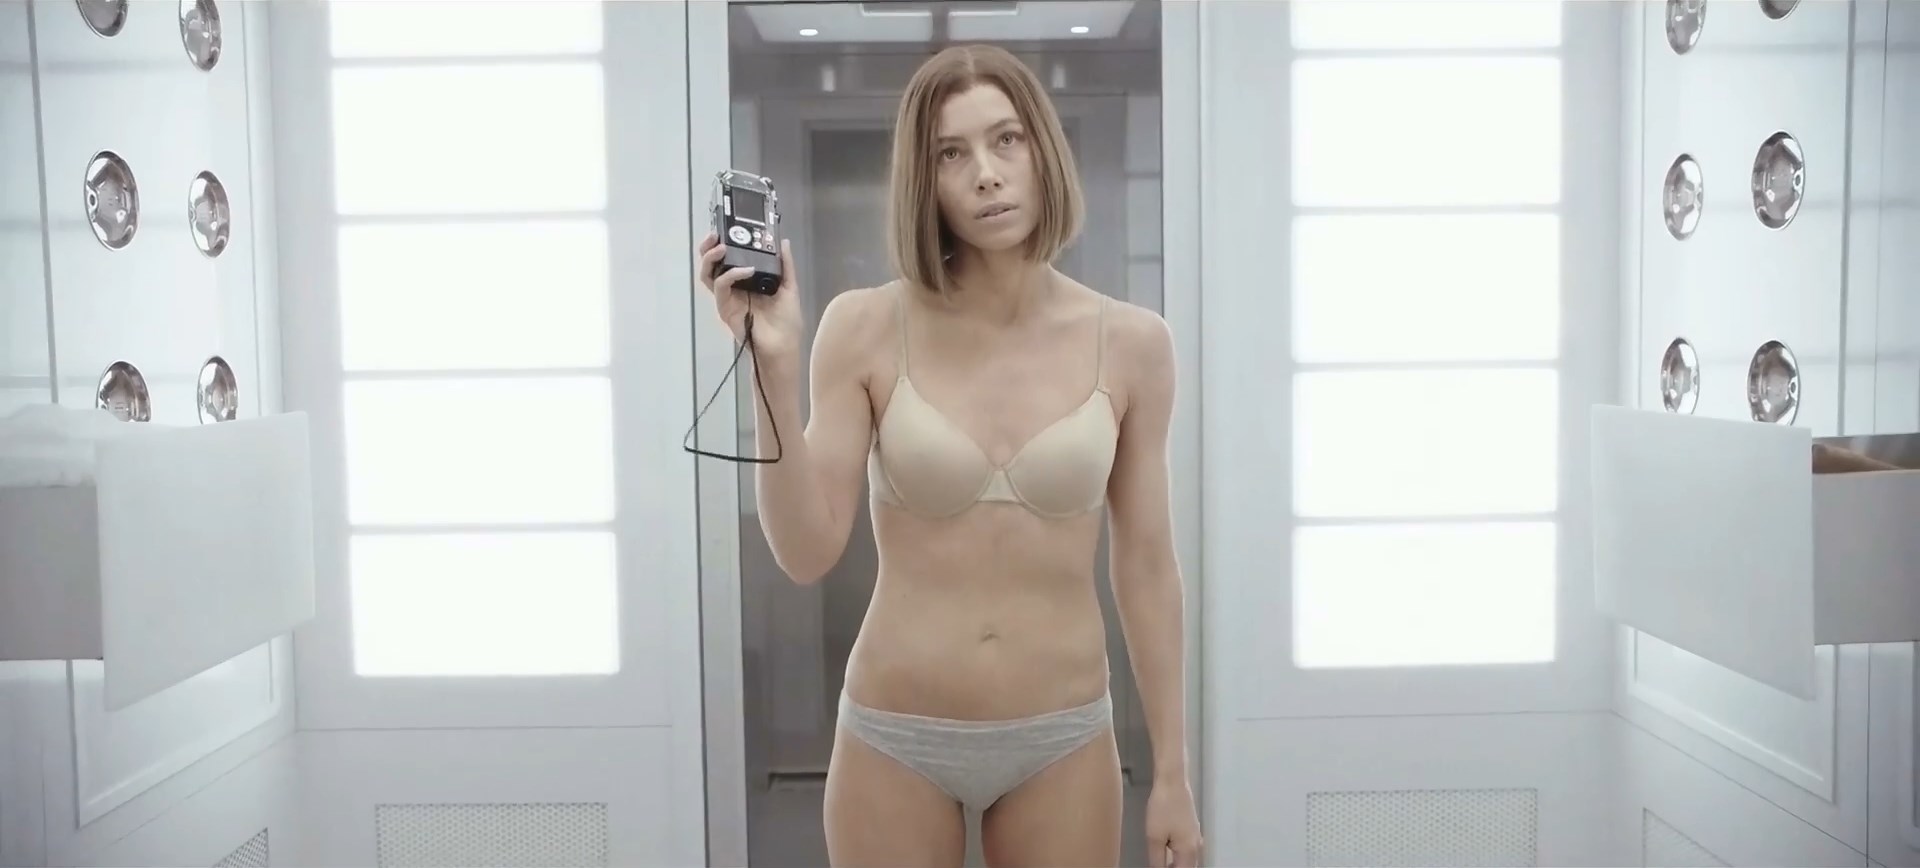 Naked pictures of jessica biel